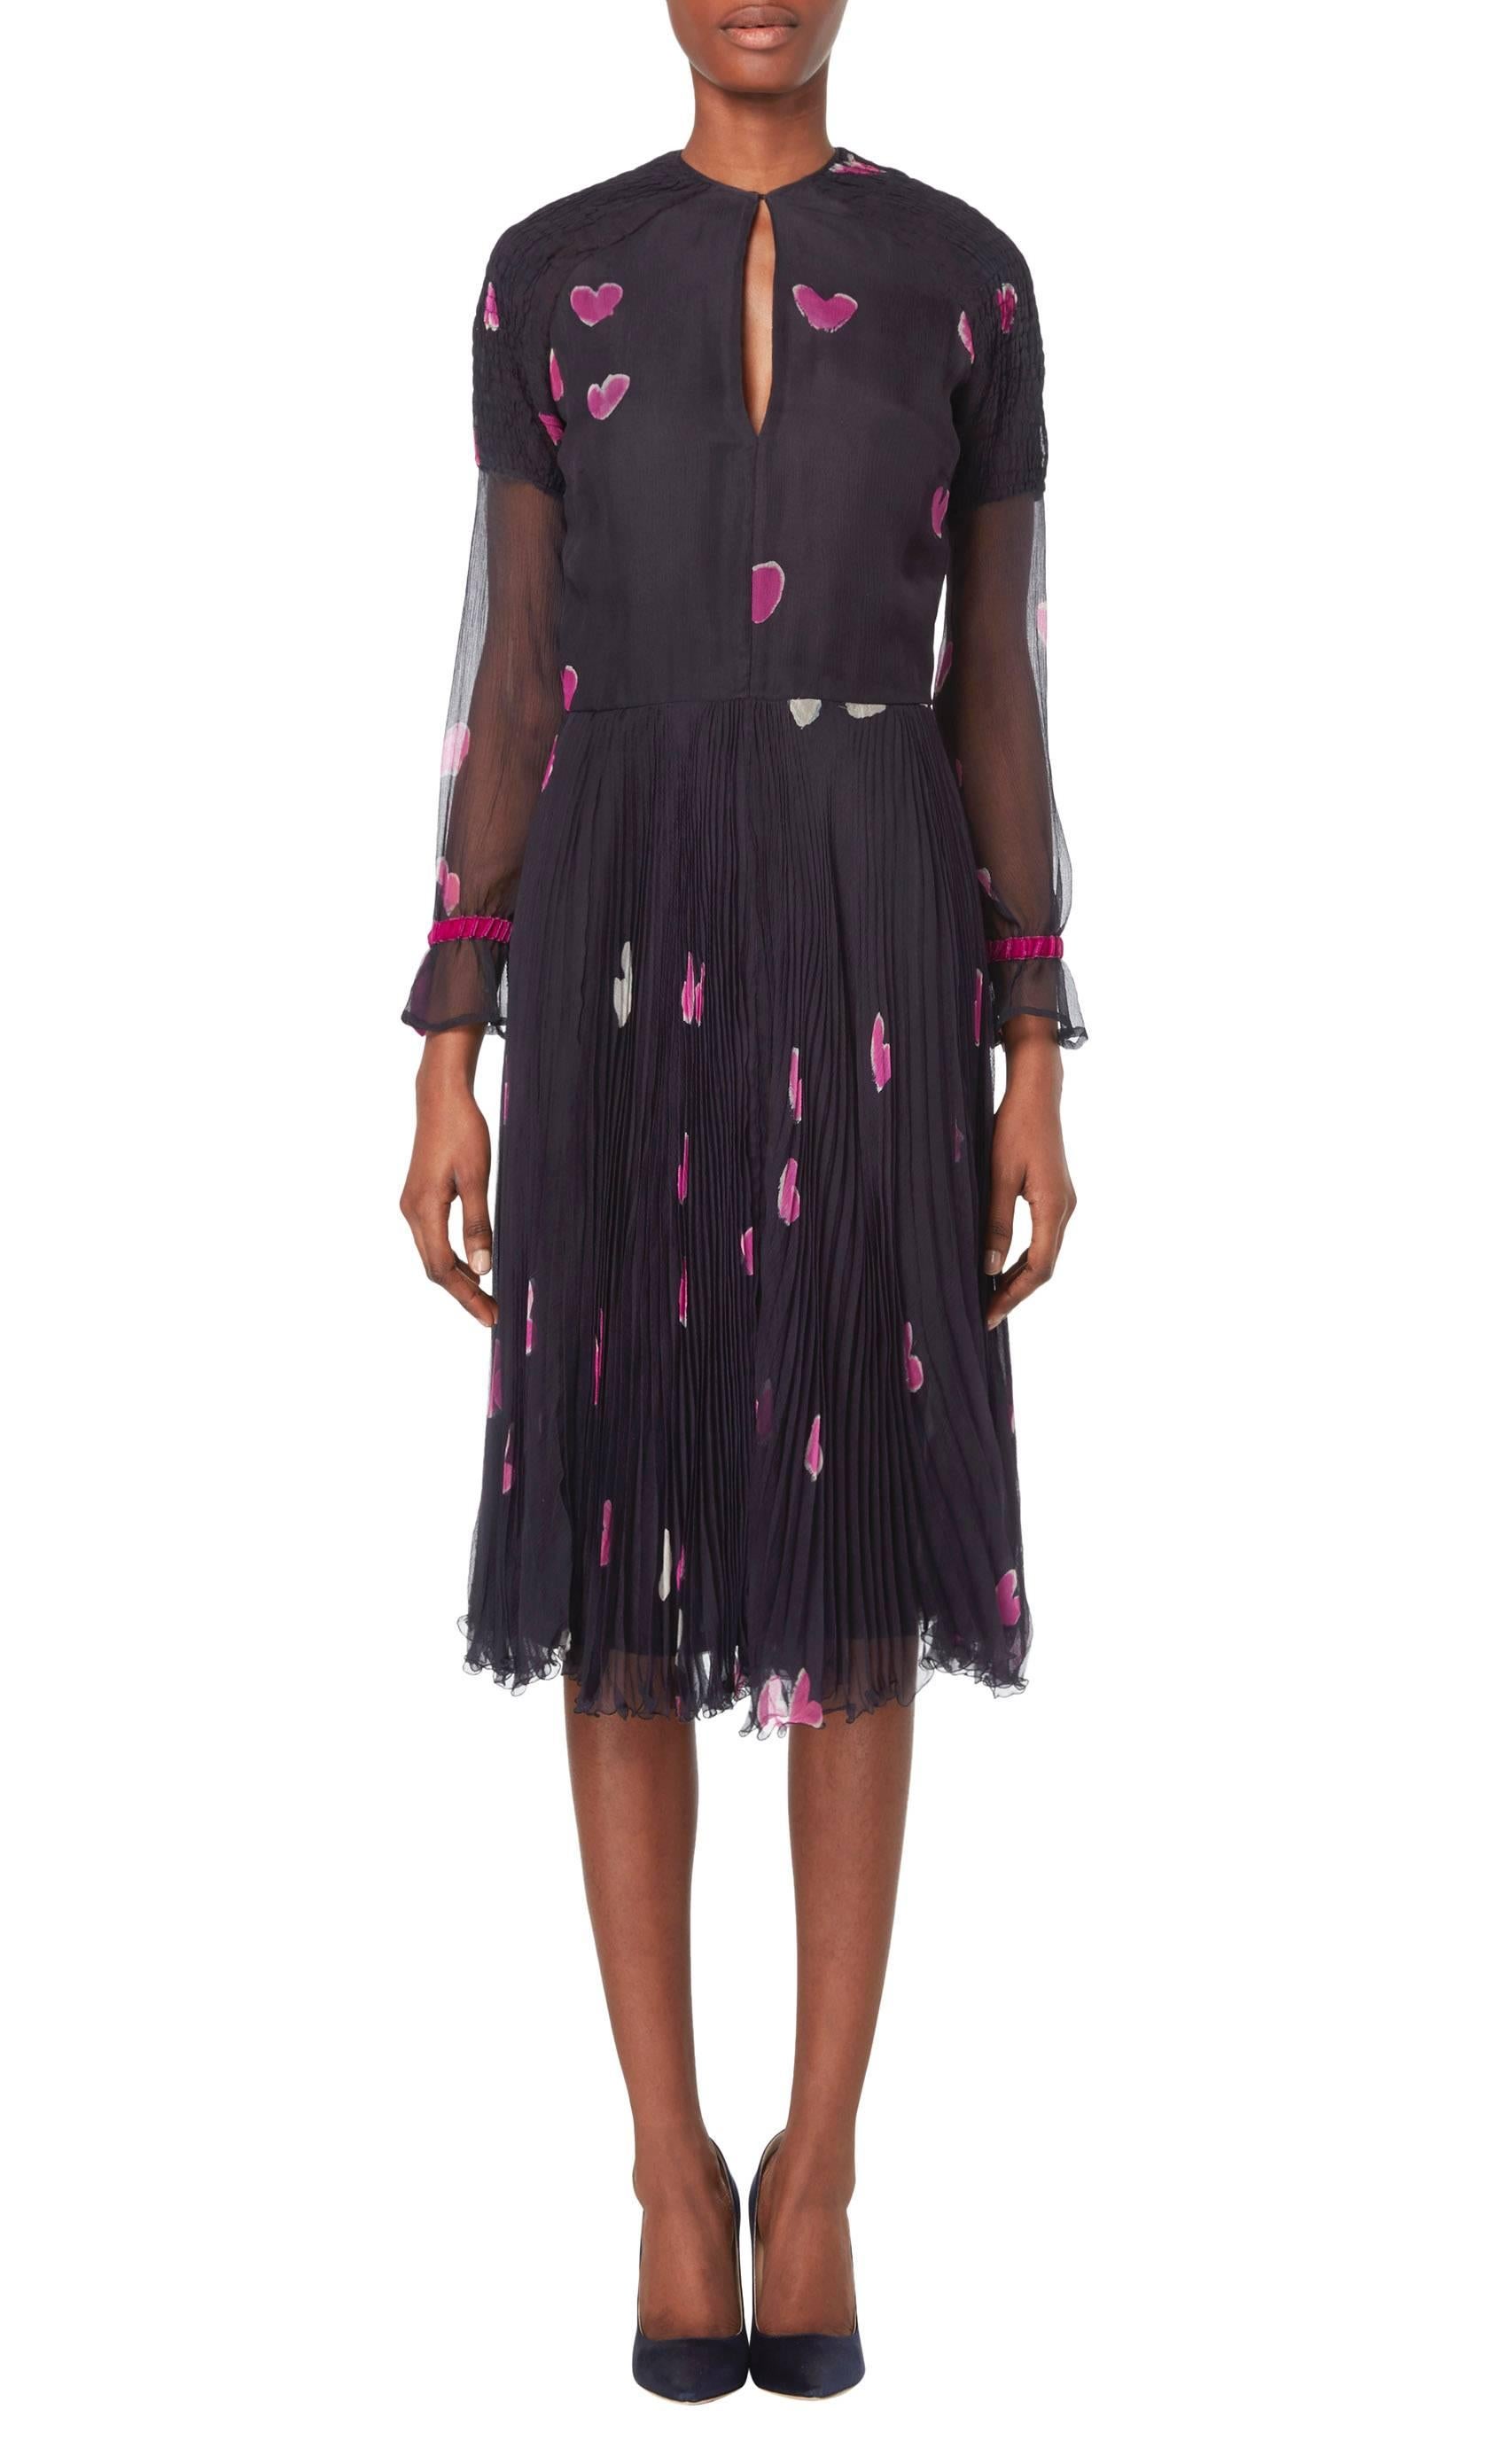 This beautiful Thea Porter couture dress features a romantic pink heart print by the textile artist Hannah Meckler. Constructed in dark blue silk chiffon, the dress features smocking on the shoulders and keyhole cutout on both the front and back.